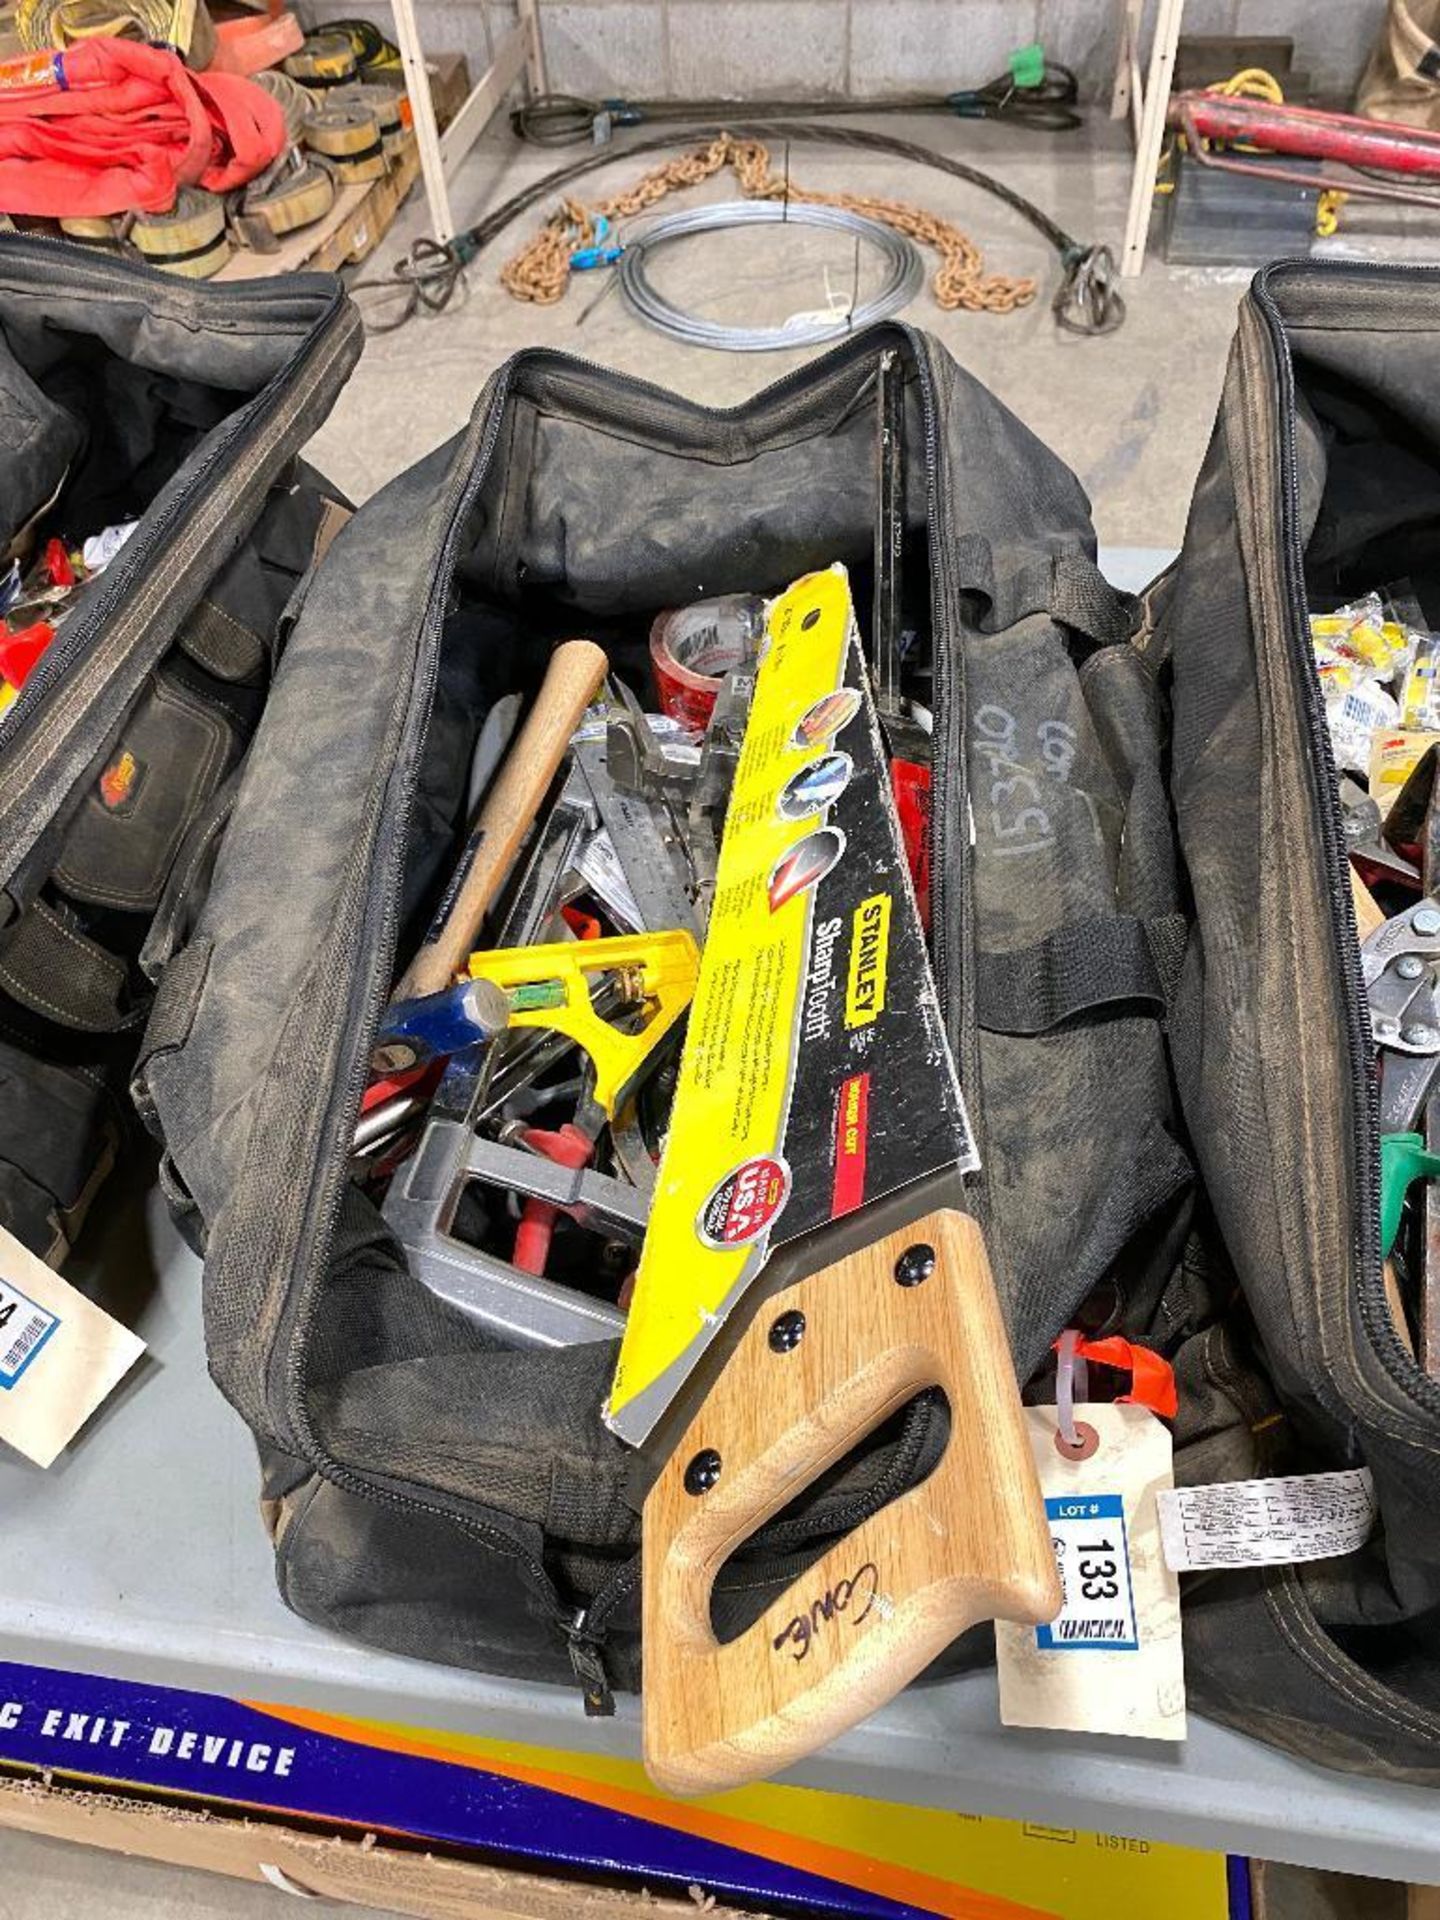 Lot of Asst. Hand Tools including Hammer, Saw, Snips, Vise Grips, Clamps, etc. - Image 3 of 6